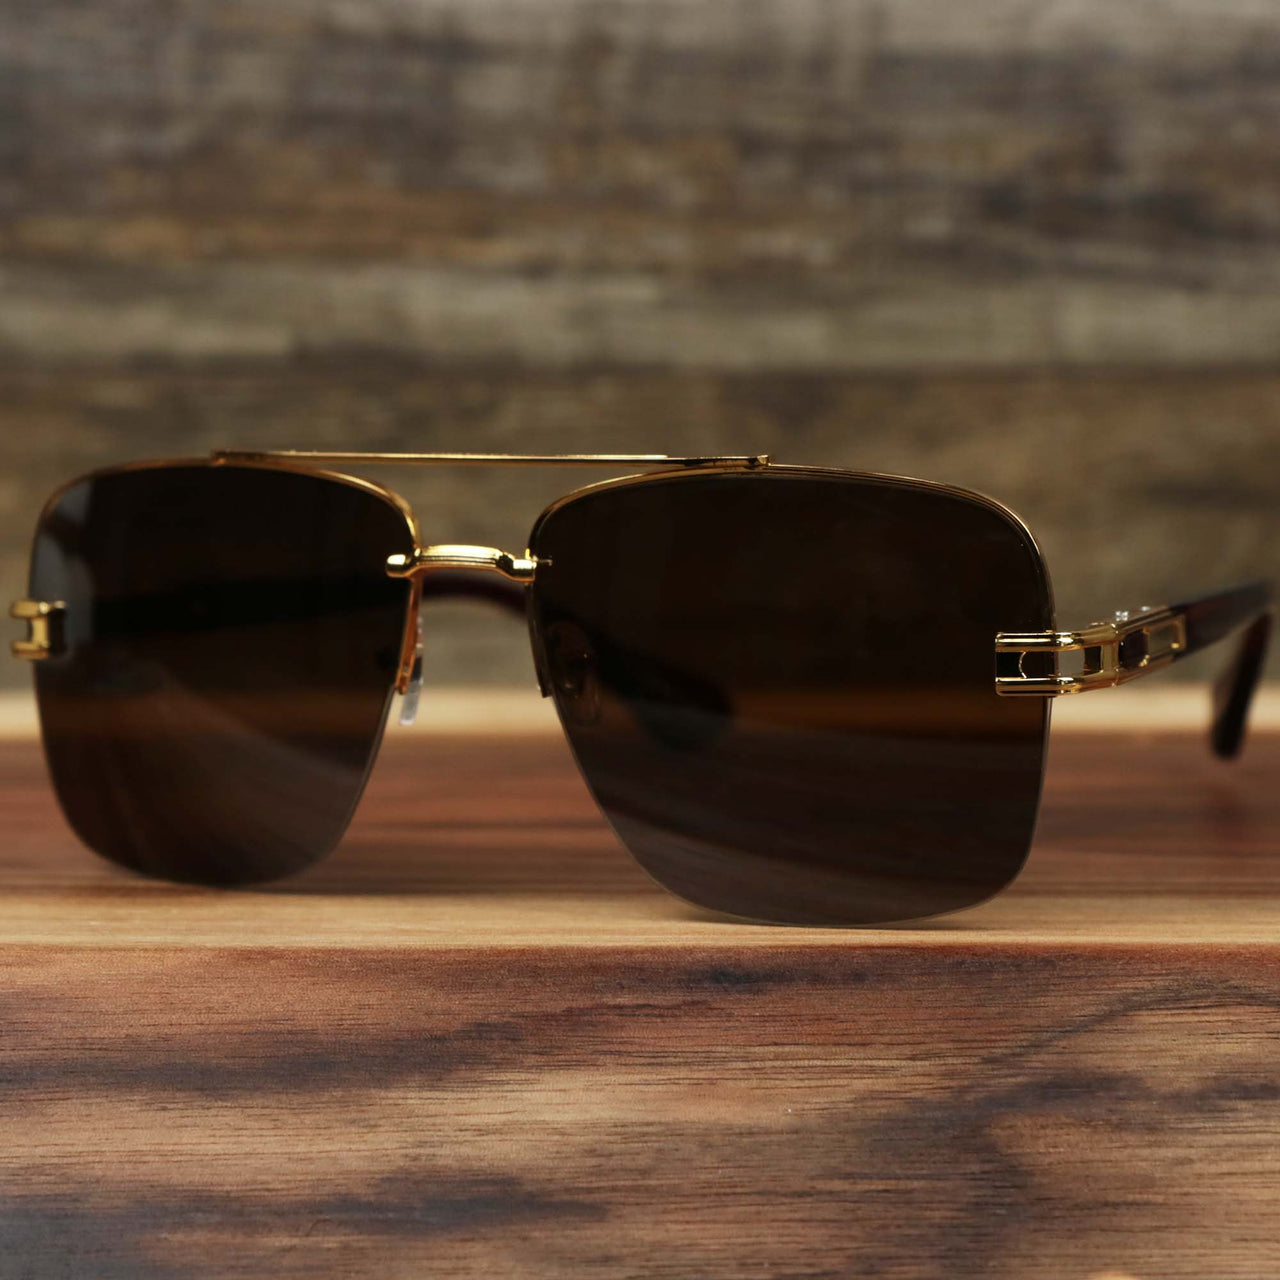 The Round Rectangle Frame Brown Lens Sunglasses with Gold Frame